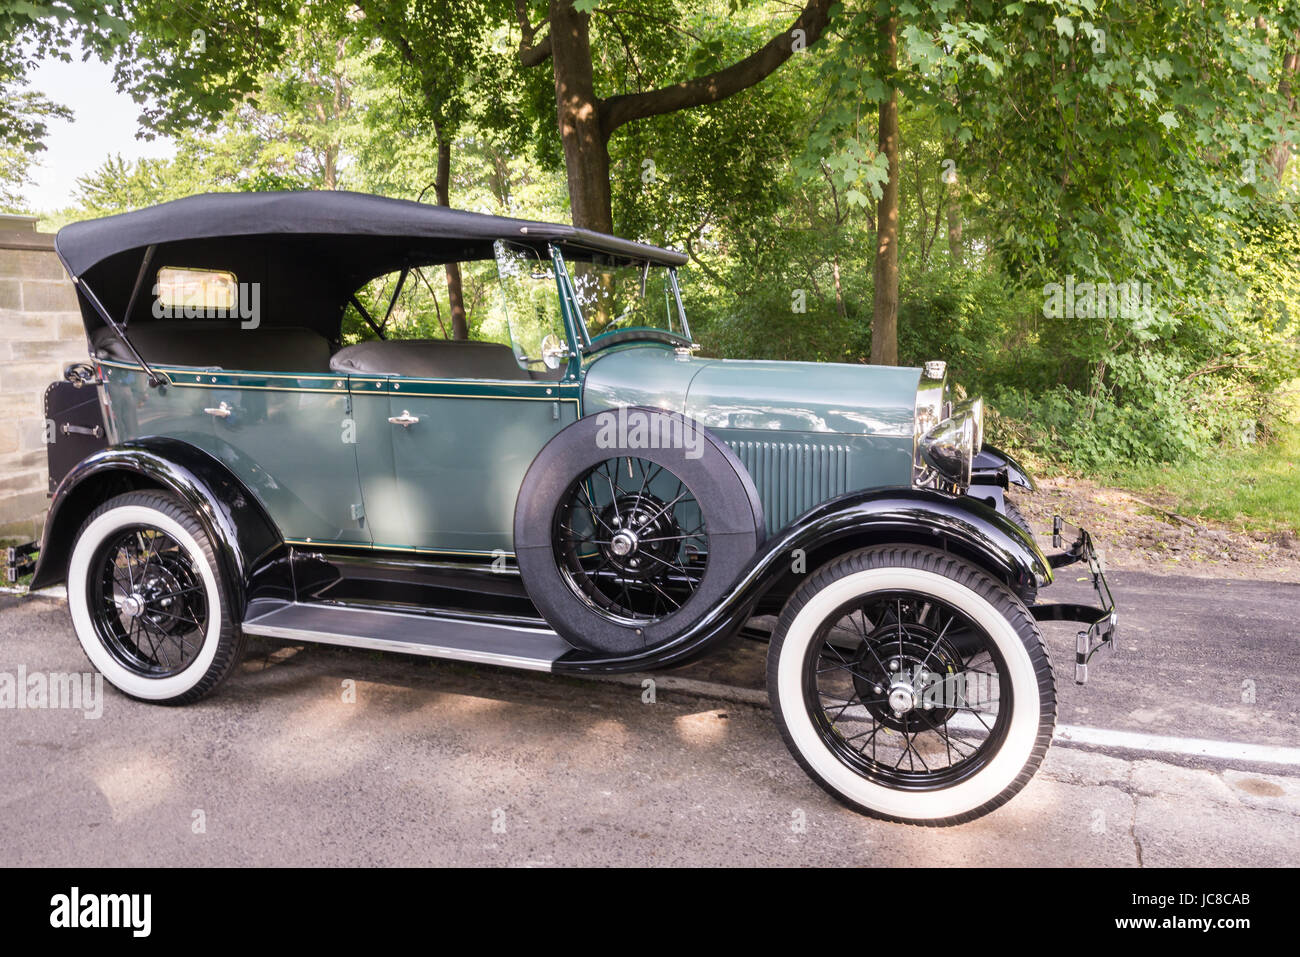 GROSSE POINTE SHORES, MI/USA - JUNE 13, 2017: A 1929 Ford Model A car at the EyesOn Design car show, held at the Edsel and Eleanor Ford House, Stock Photo